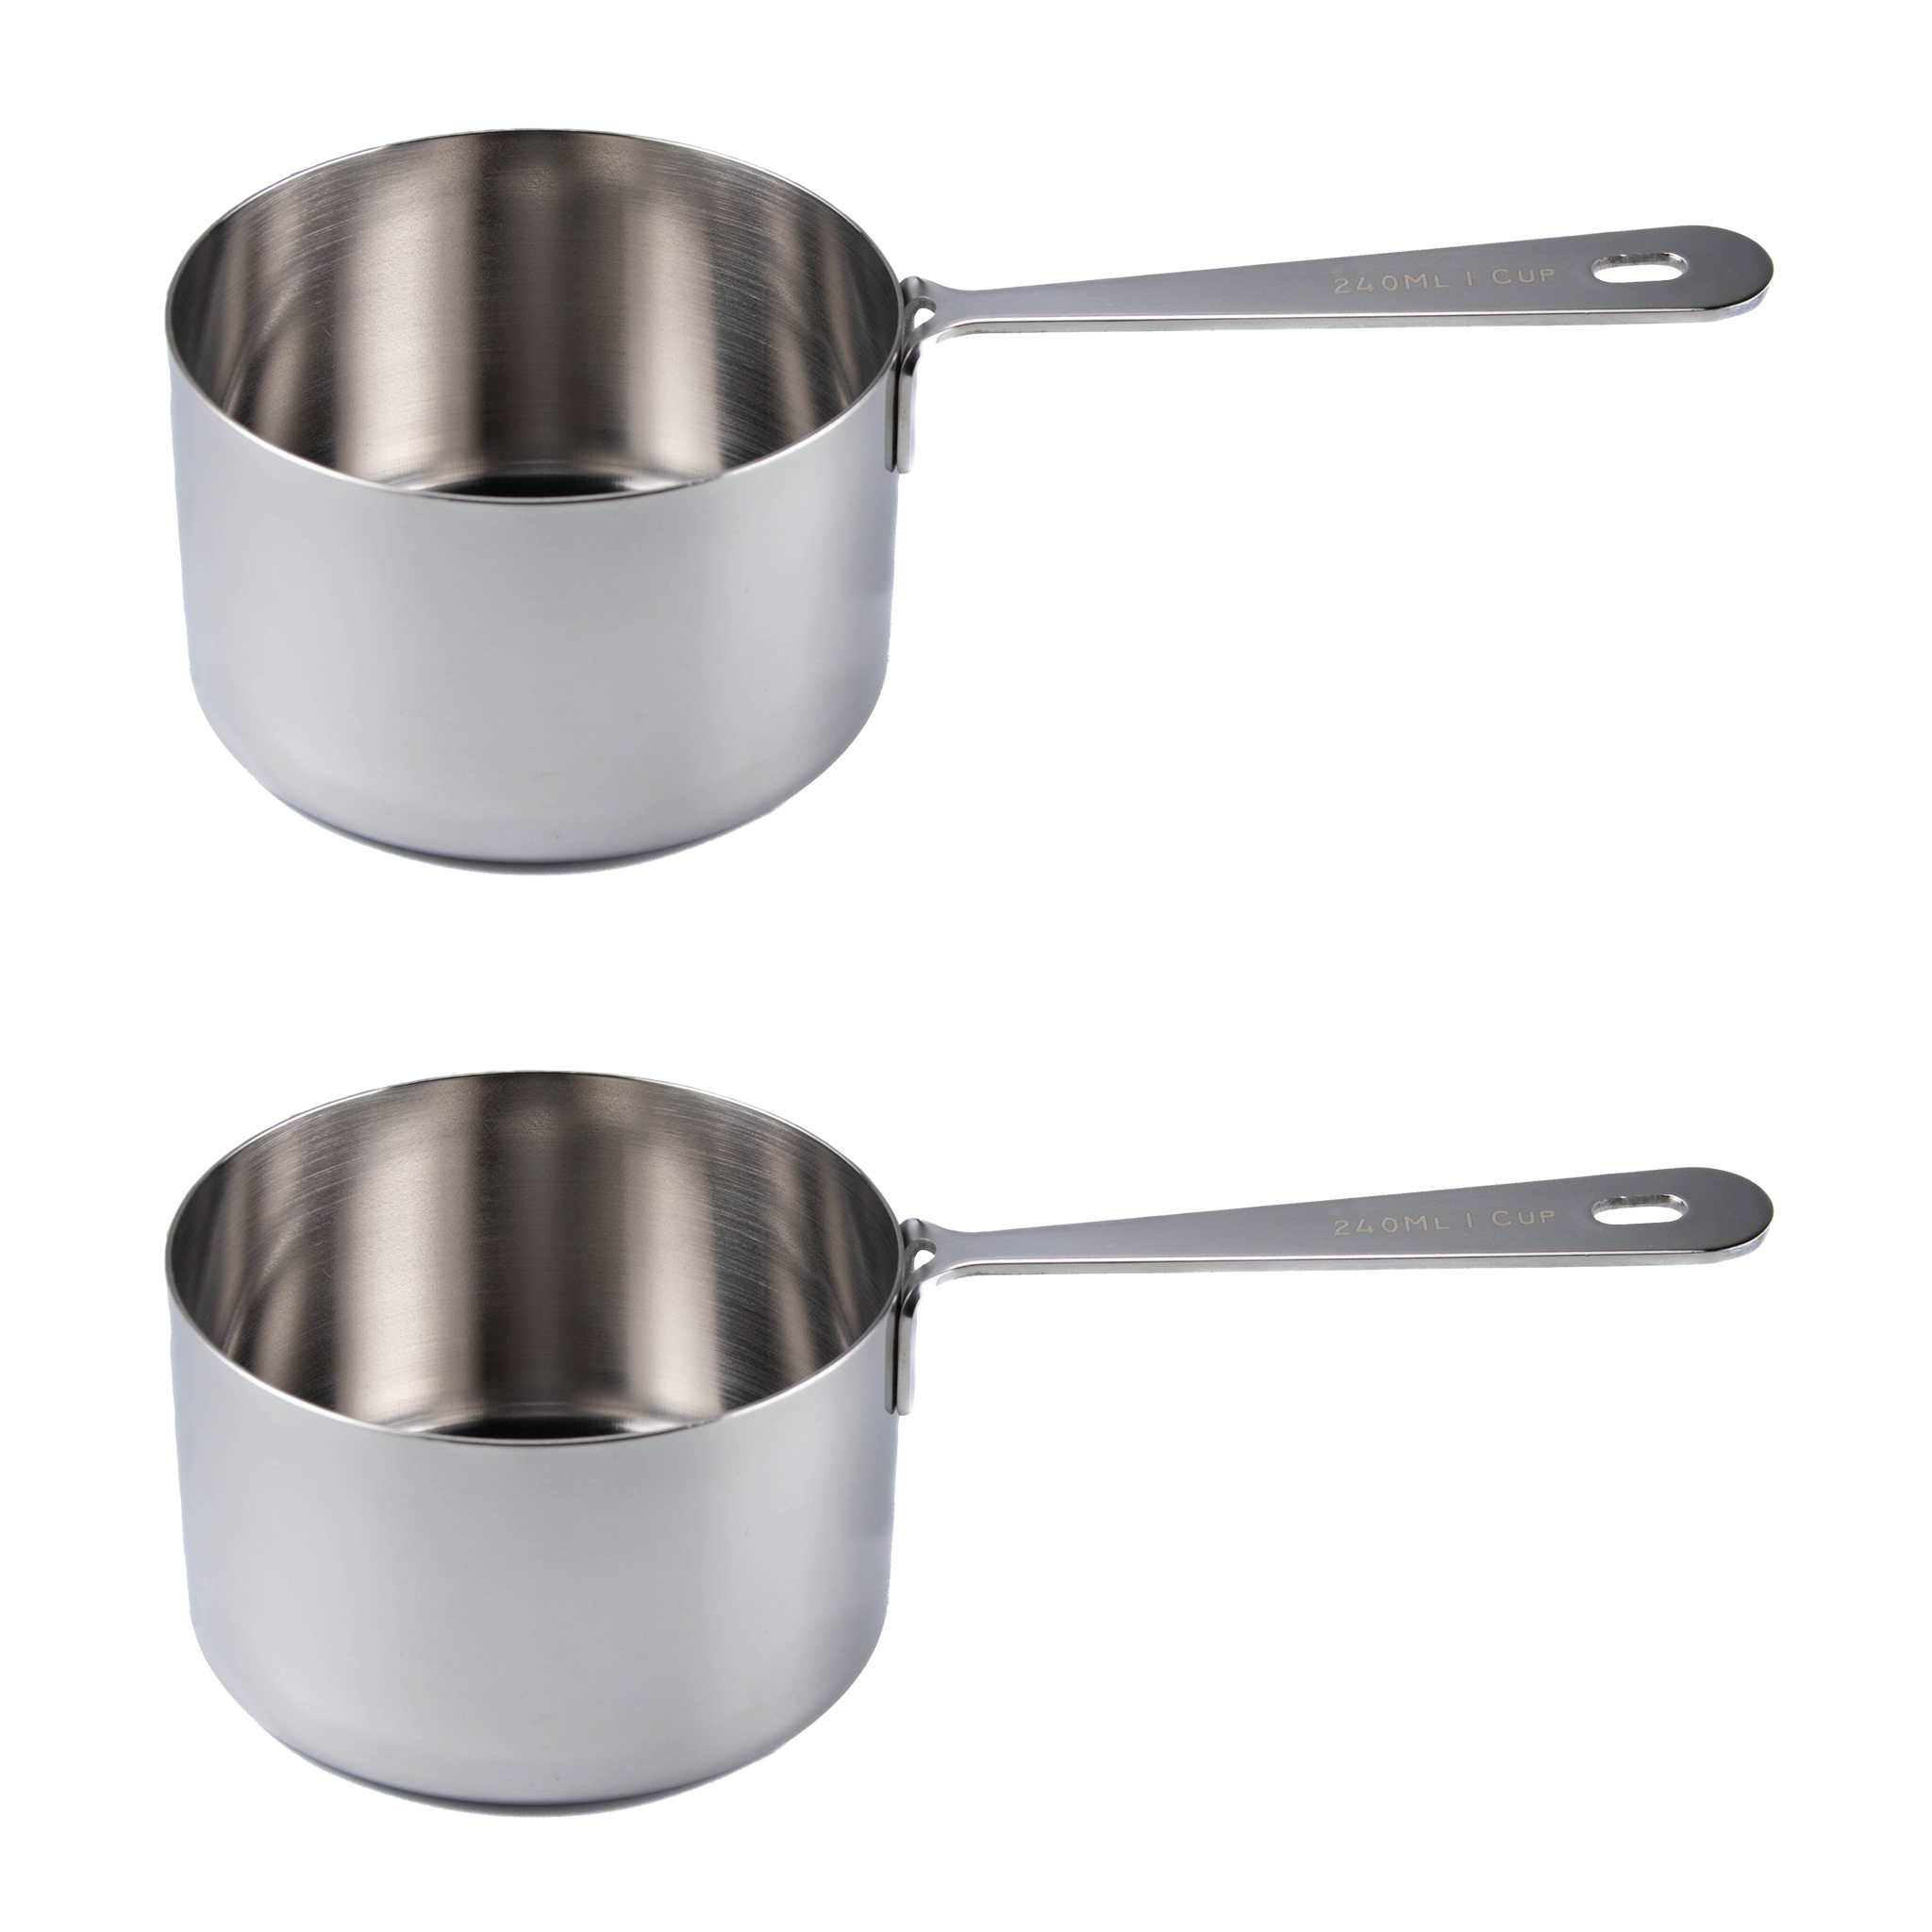 Honey Bear Kitchen 1/4 Cup 60 ml Leave-In Canister Scoops, Polished Stainless Steel (Set of 2)